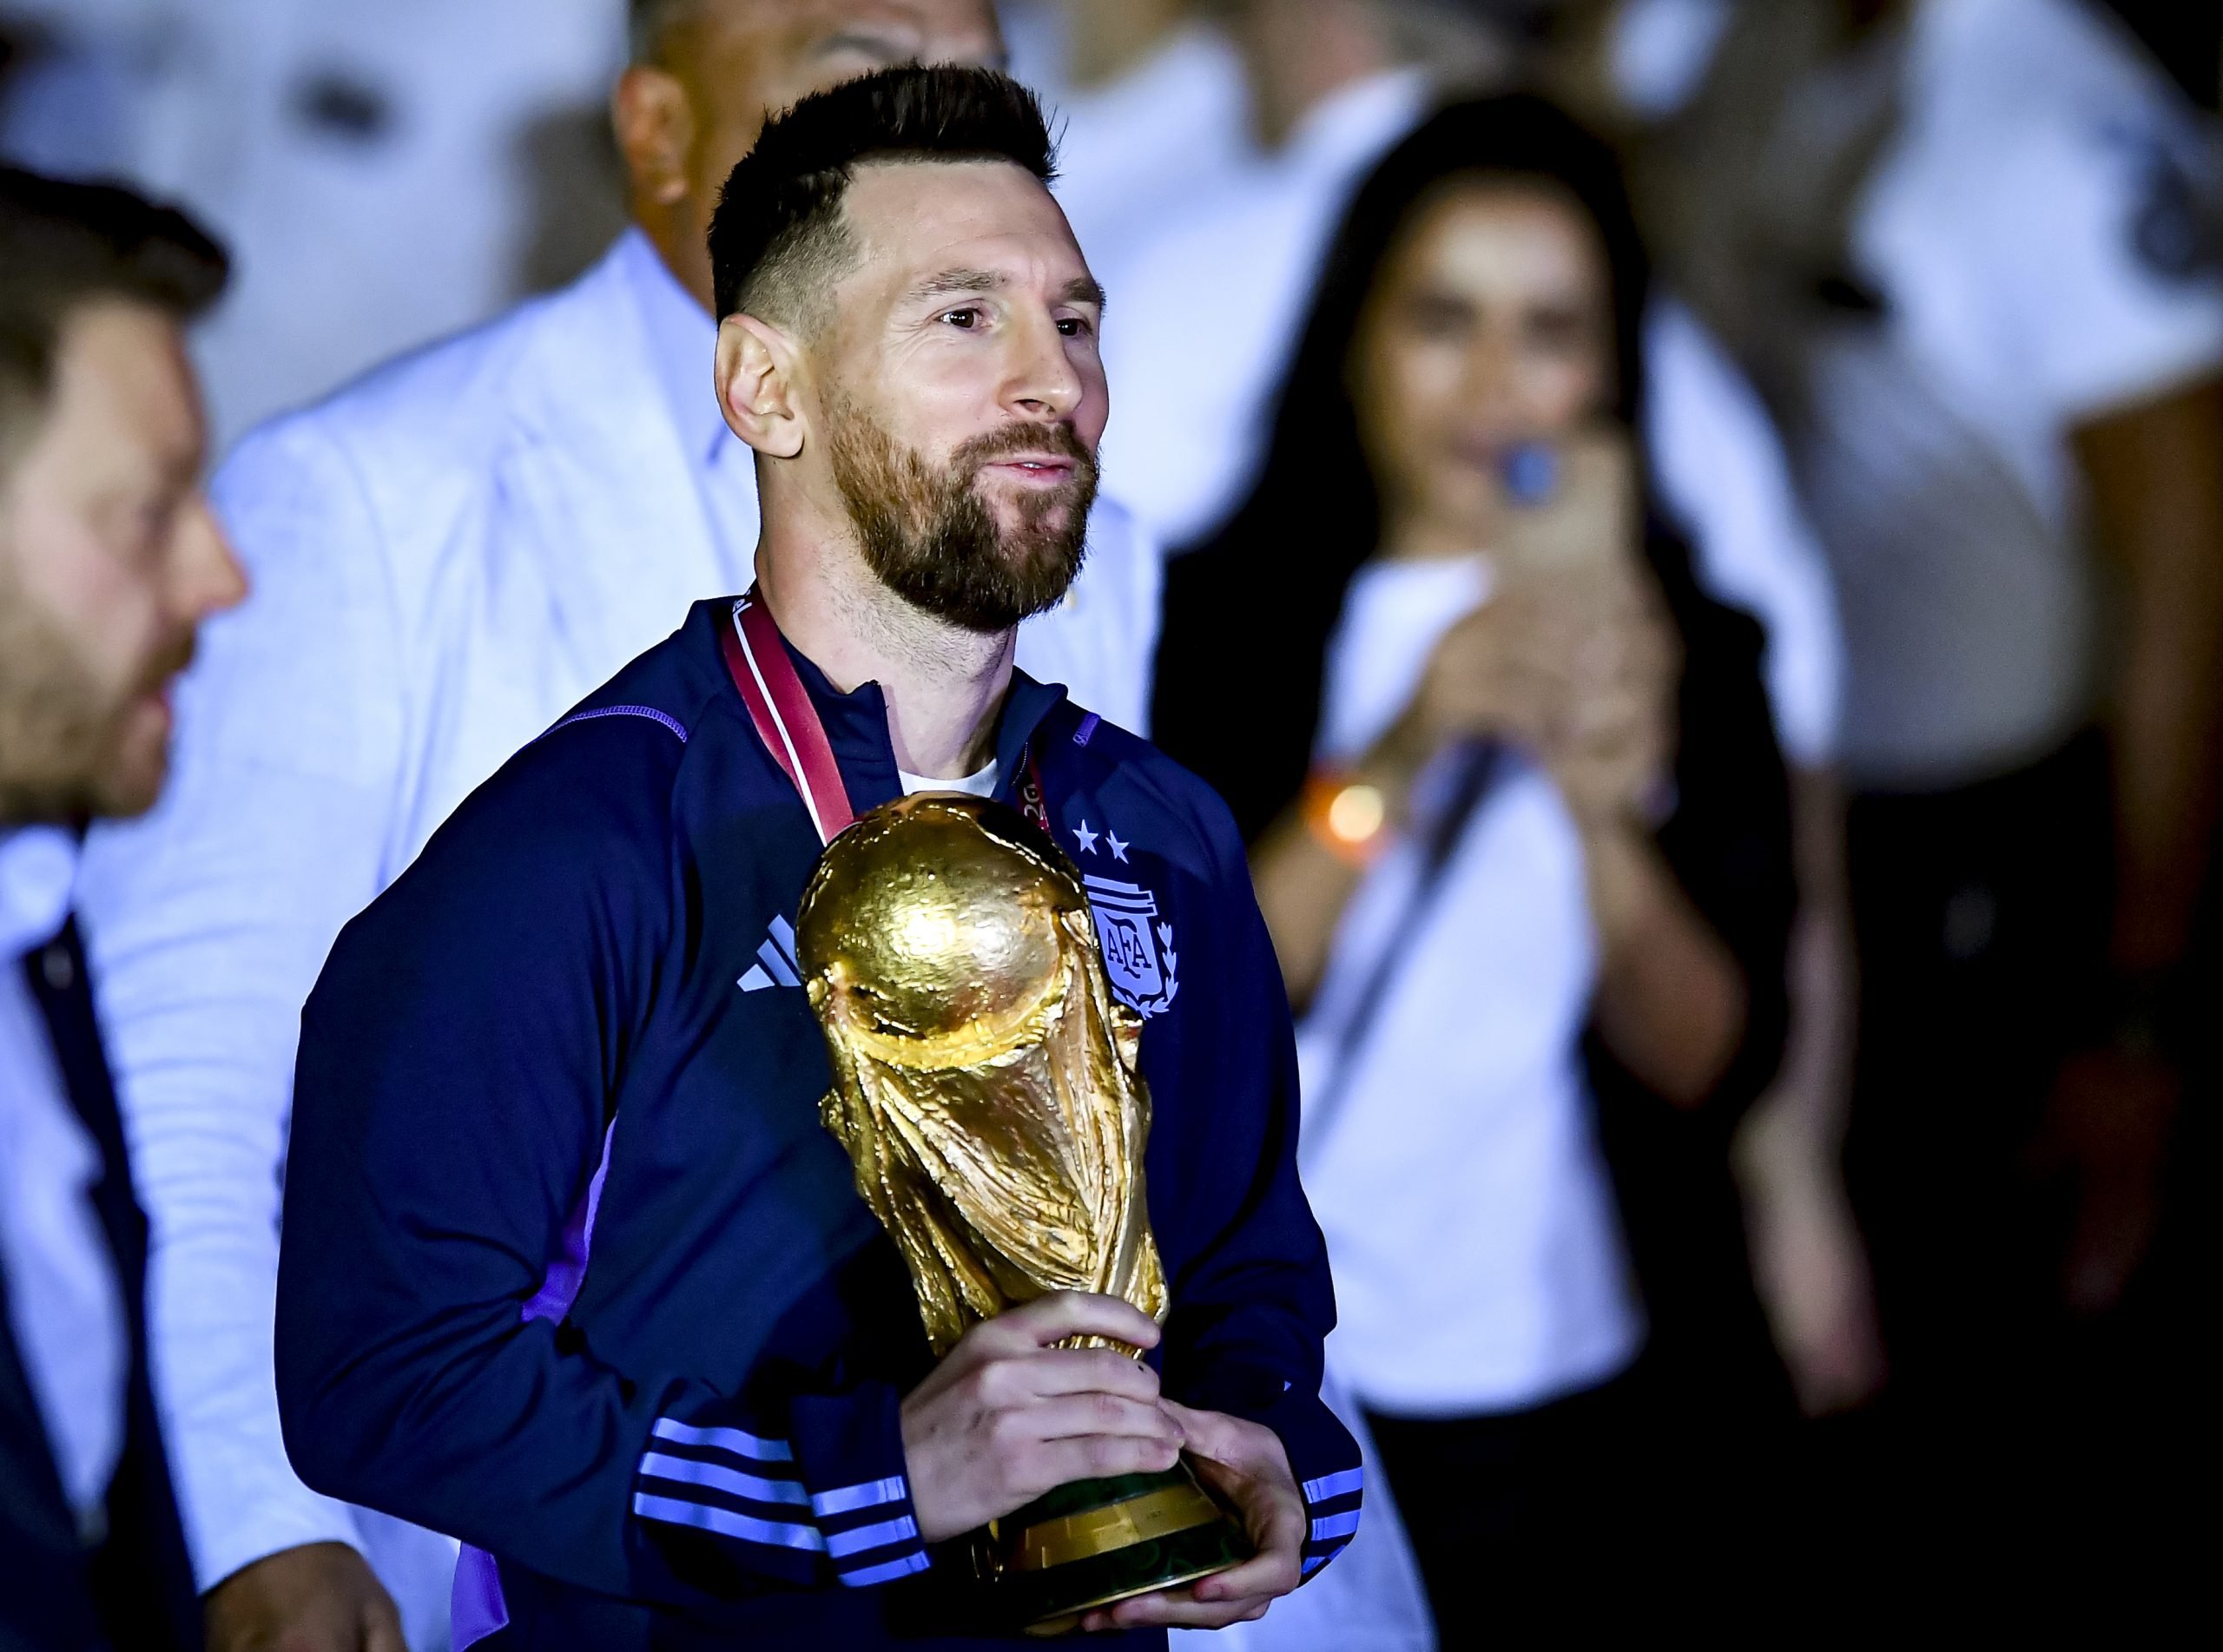 Lionel-Messi-2022-World-Cup-GettyImages-1245739377-scaled.jpg